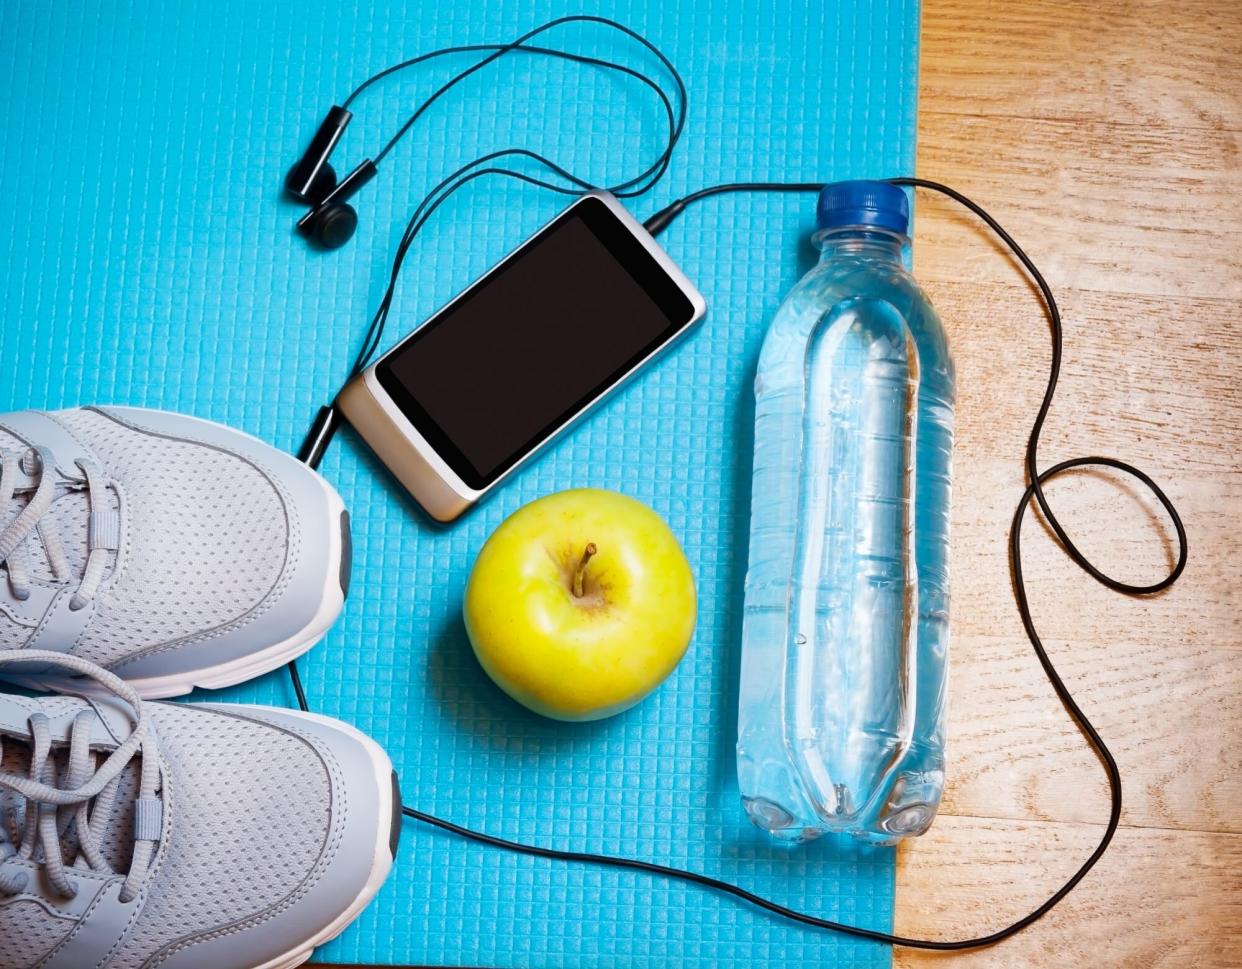 Best Podcasts to Listen to While Going for a Walk: sneakers, phone, headphones